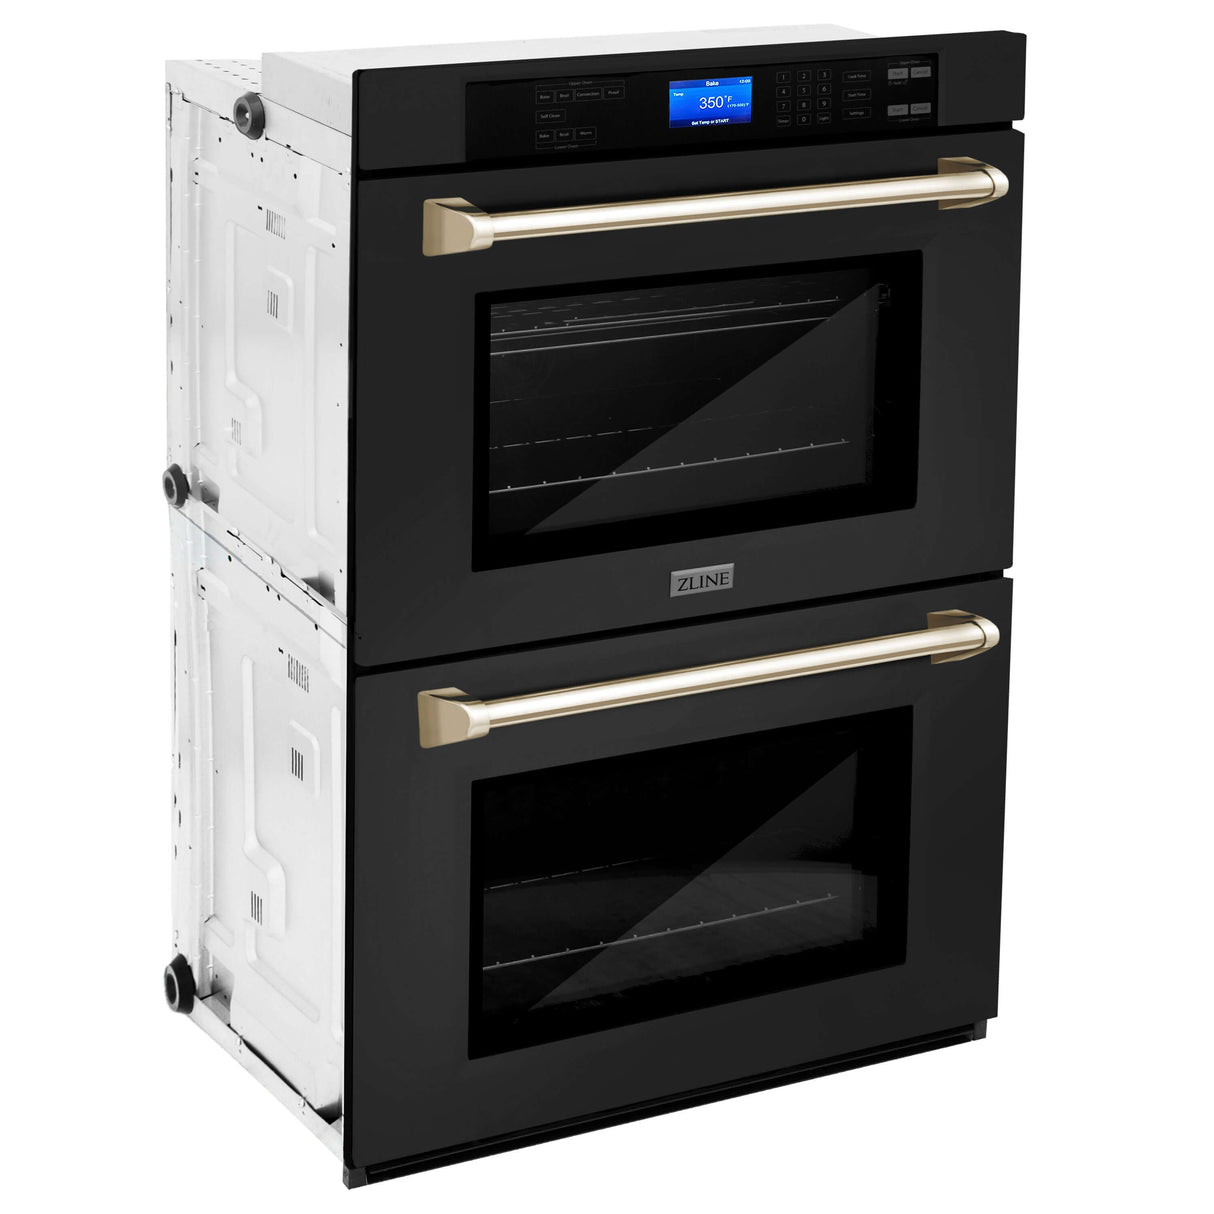 ZLINE Autograph Edition 30 in. Electric Double Wall Oven with Self Clean and True Convection in Black Stainless Steel and Polished Gold Accents (AWDZ-30-BS-G)